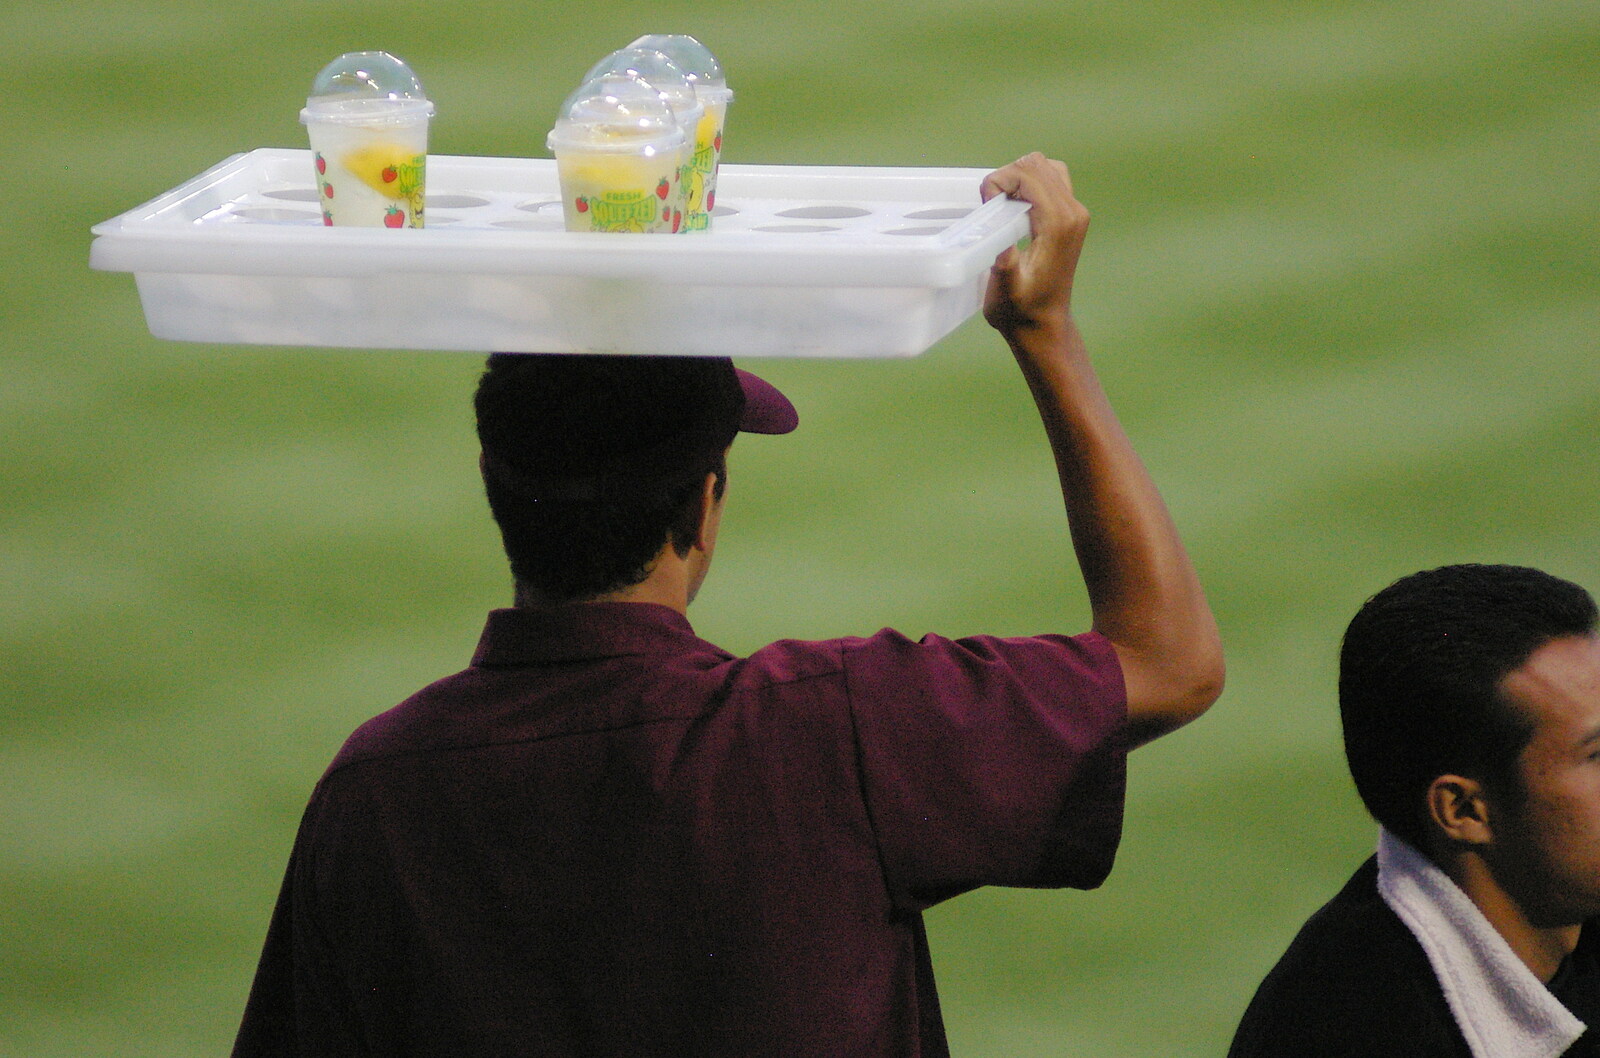 Some dude with drinks on his head from The Padres at Petco Park: a Baseball Game, San Diego, California - 31st May 2005